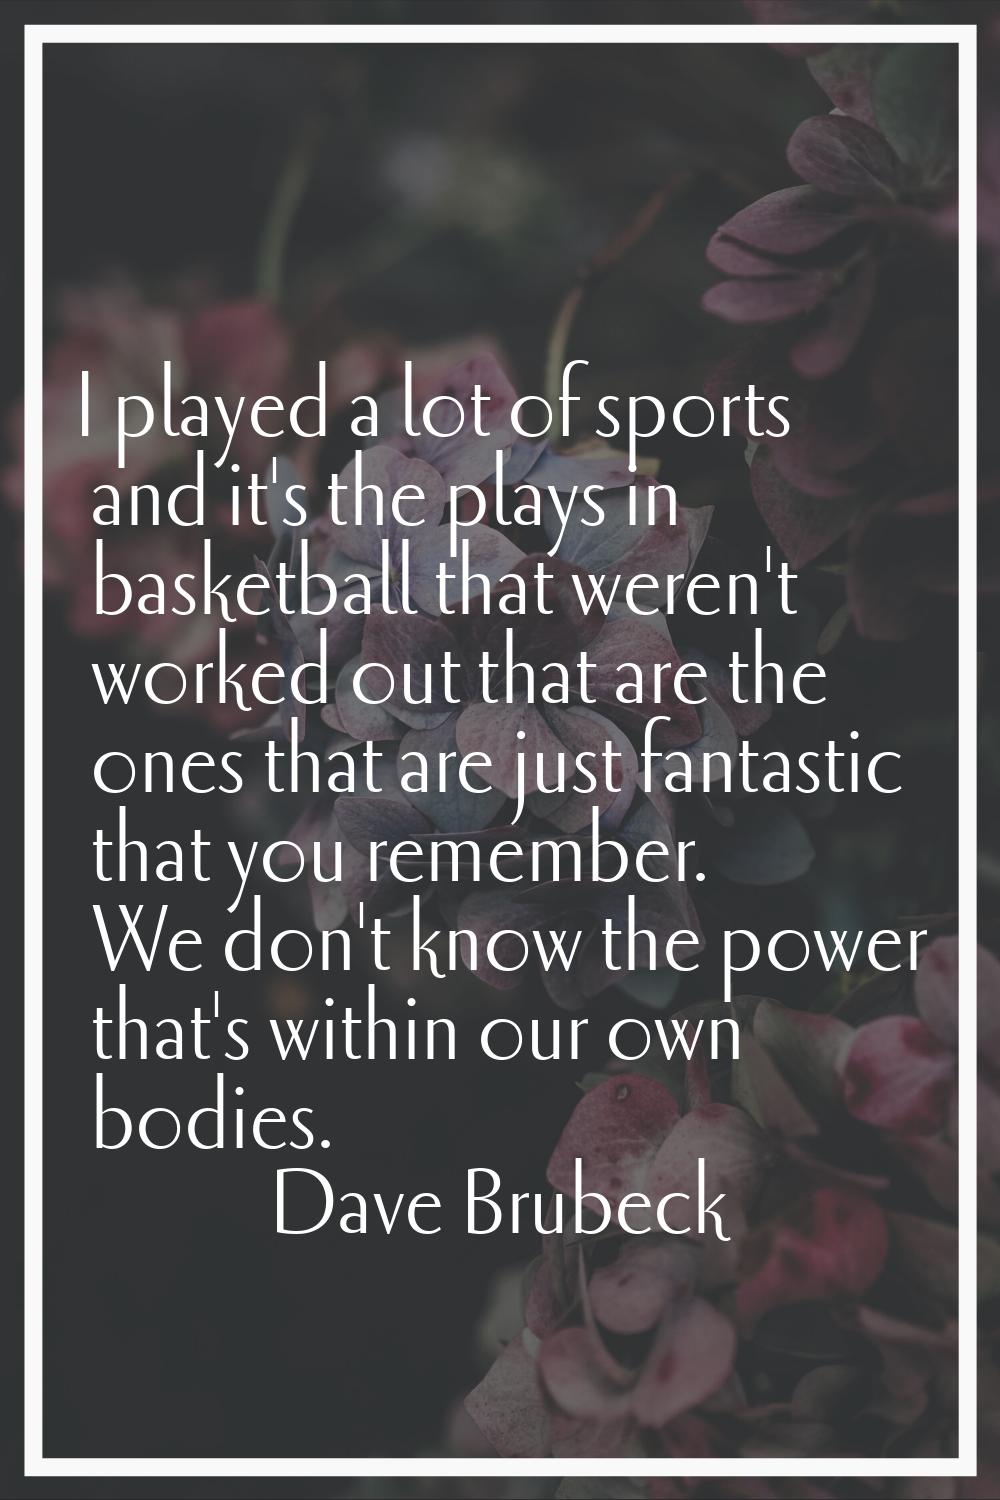 I played a lot of sports and it's the plays in basketball that weren't worked out that are the ones